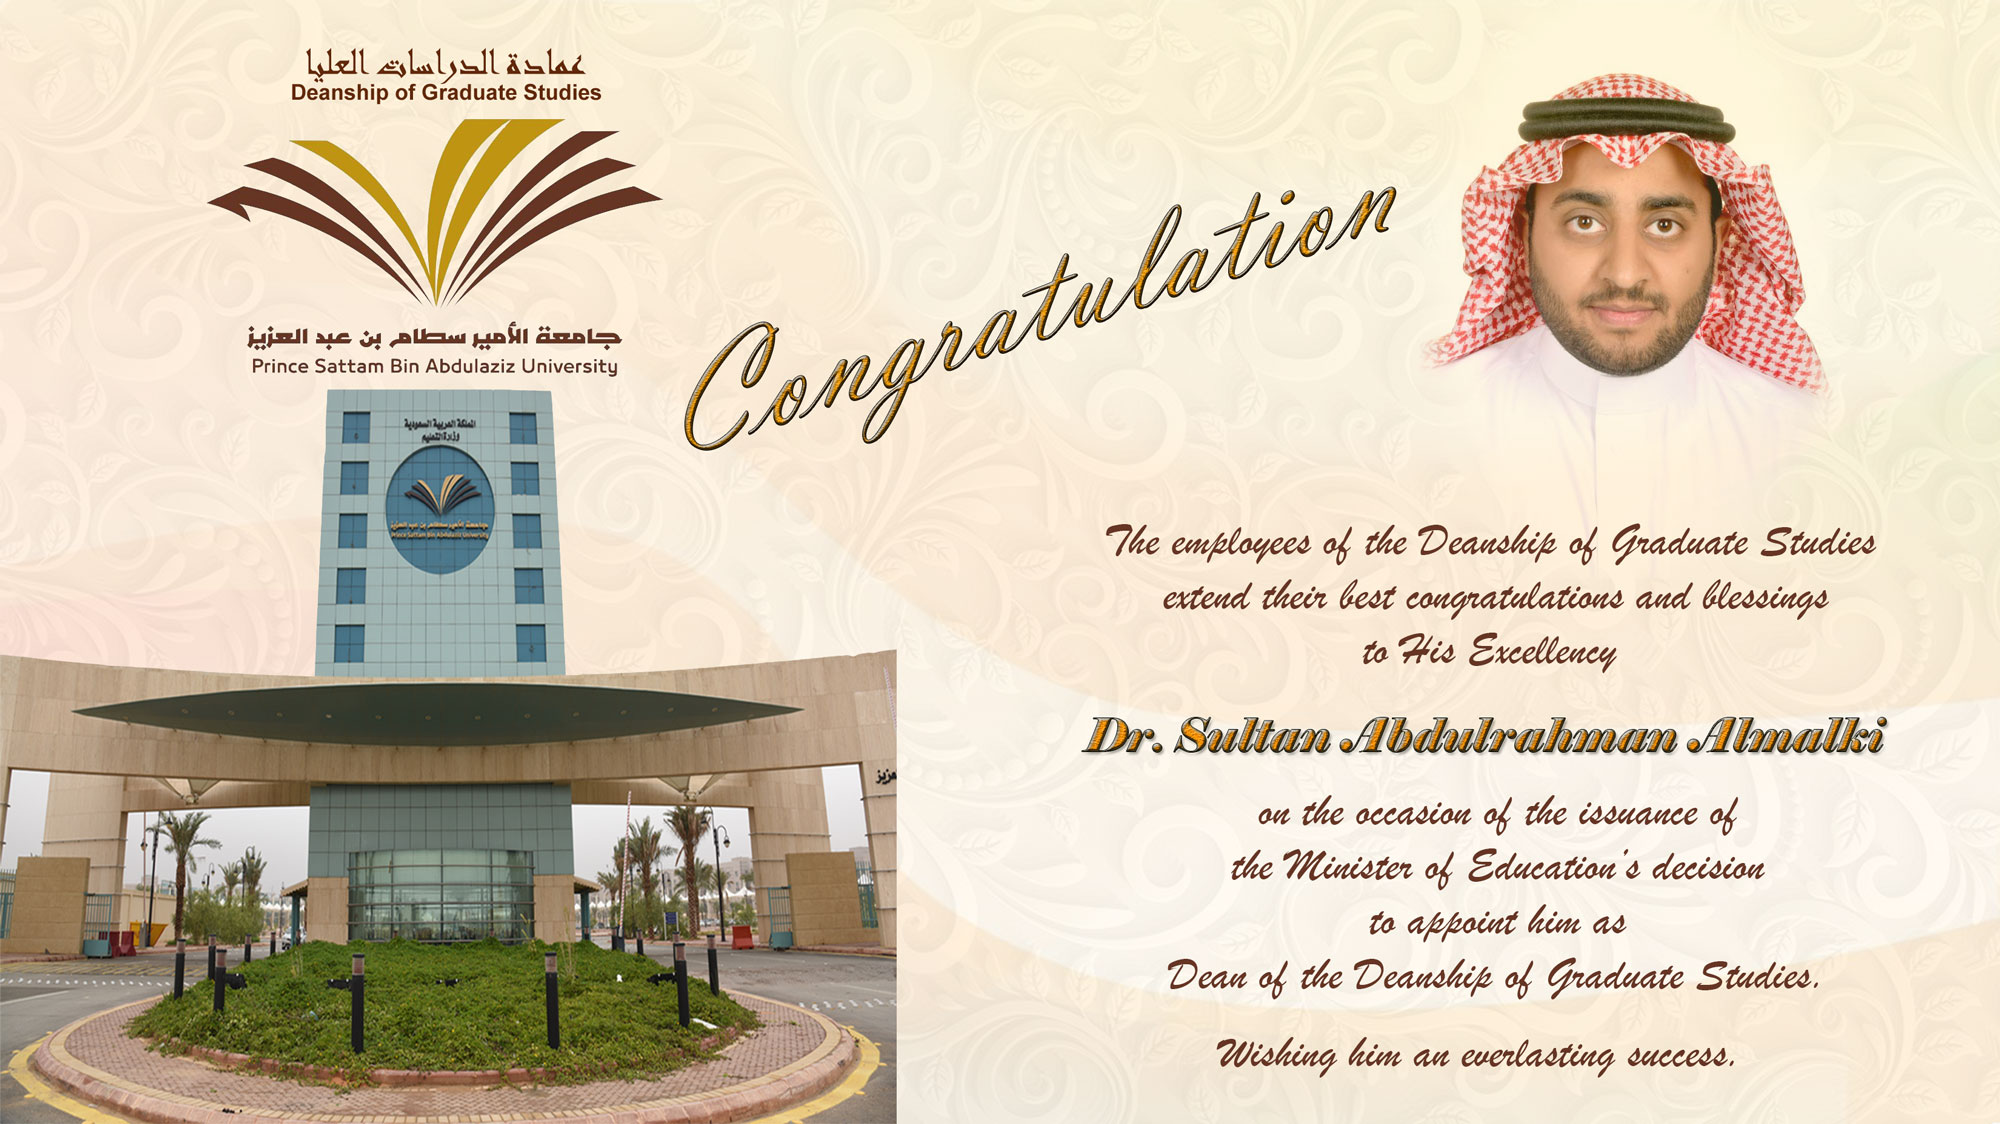 congratulations and blessings to His Excellency Dr. Sultan Abdulrahman Almalki